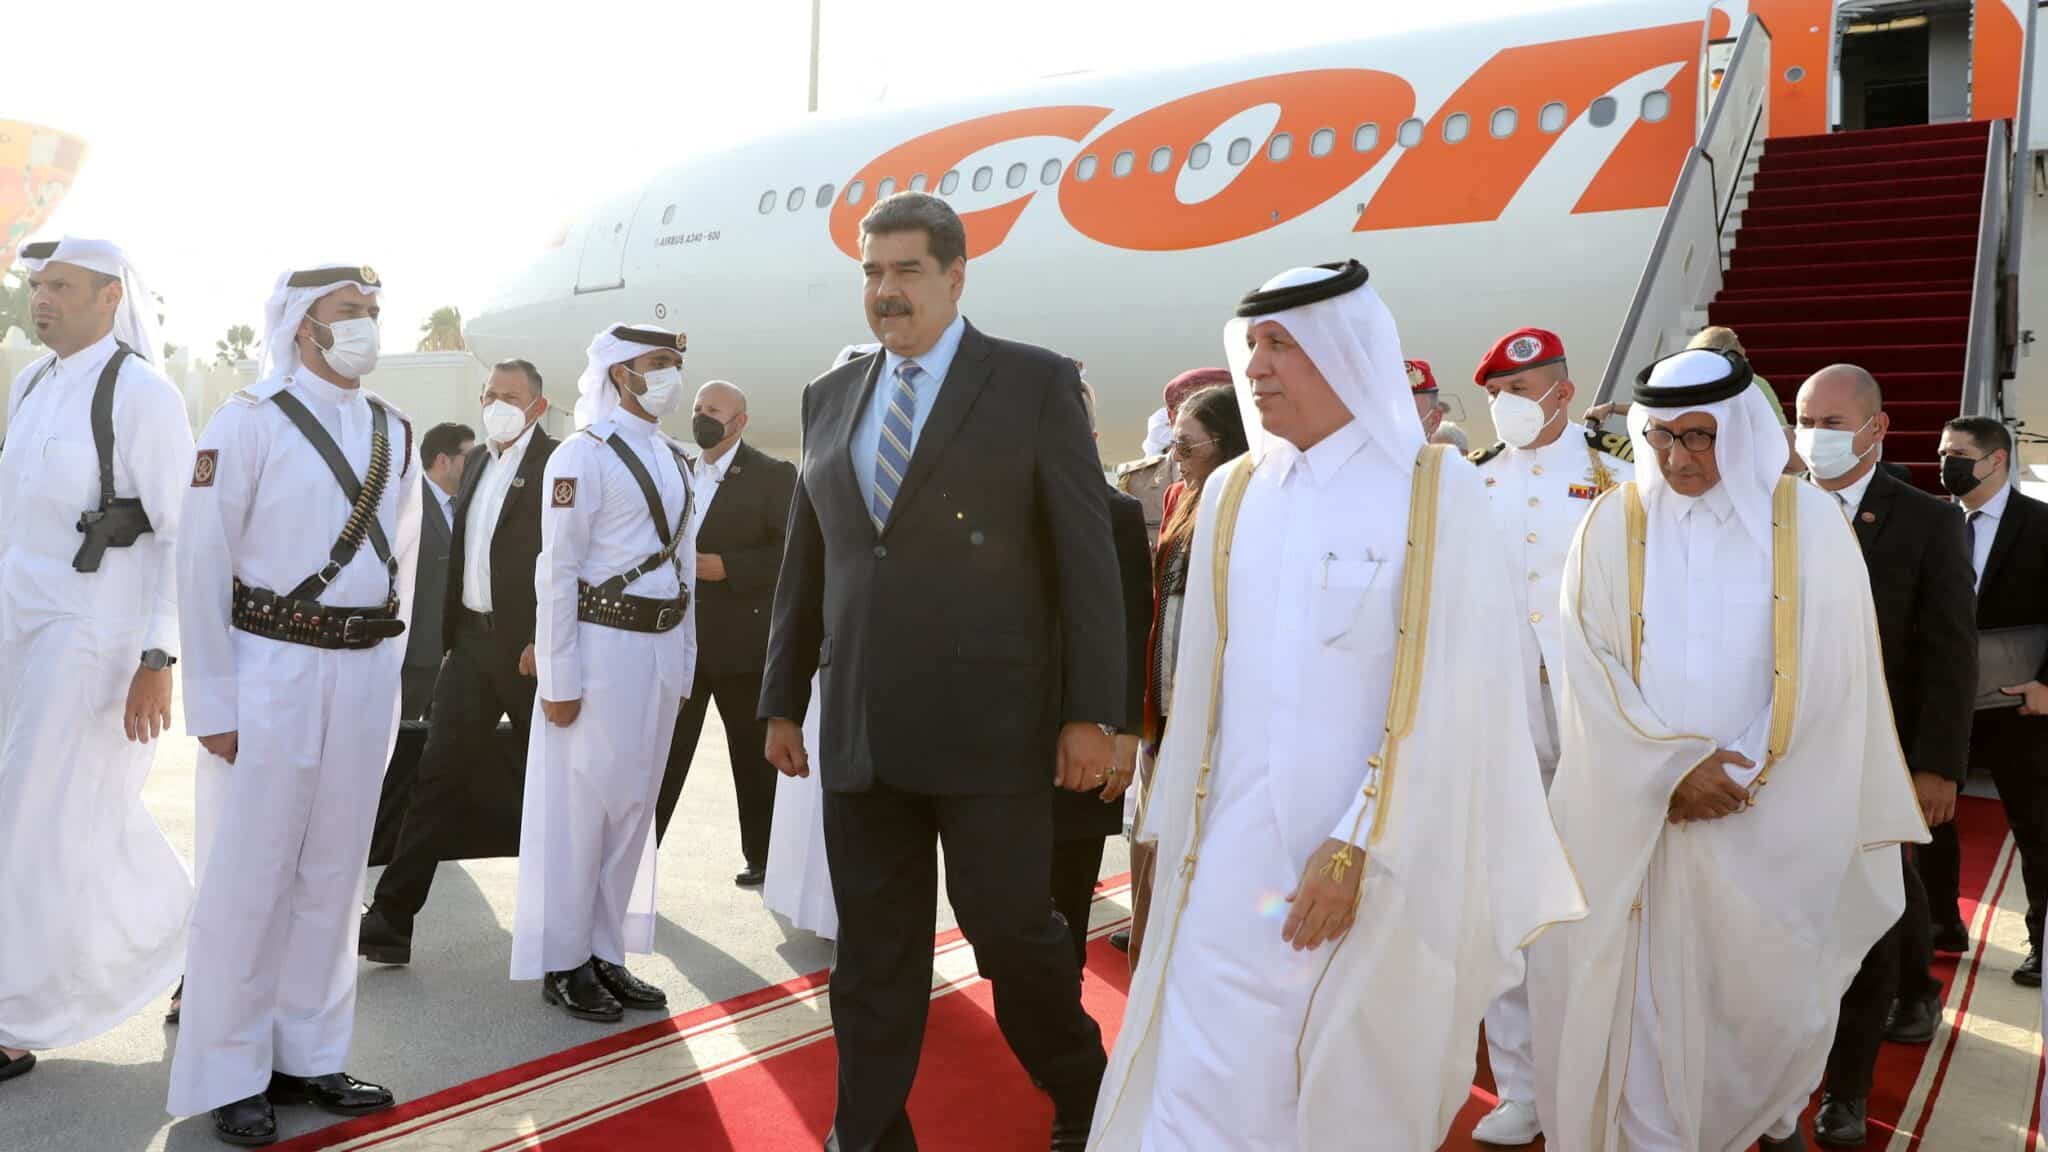 President Nicolas Maduro is welcomed by the Qatari Foreign Minister H.E. Mr. Soltan bin Saad Al-Muraikhi after arriving in Doha, Qatar, June 14, 2022. Photo: Reuters.